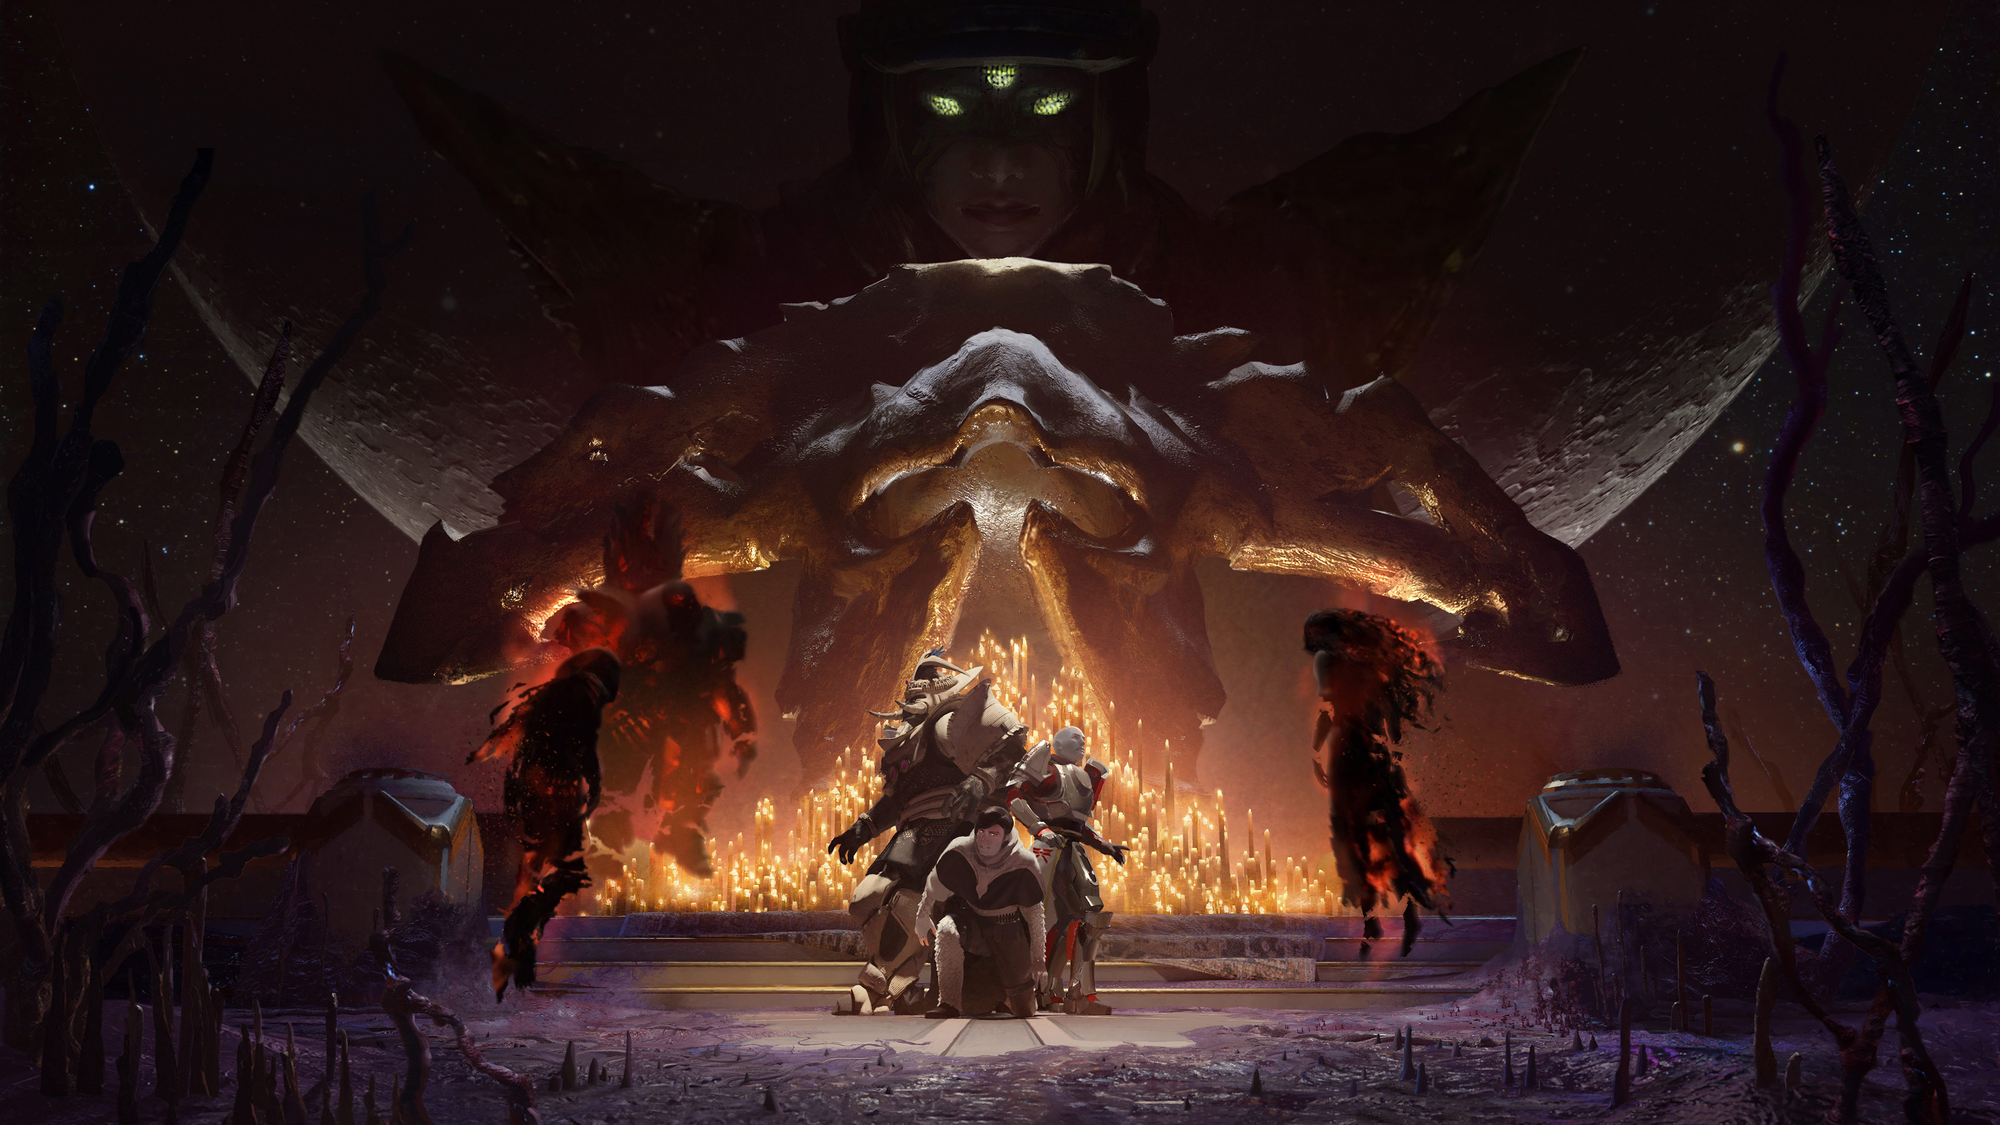 Crow, Caiatl and Zavala surrounded by their Nightmares. With the Crown of Sorrows and Eris Morn in the background